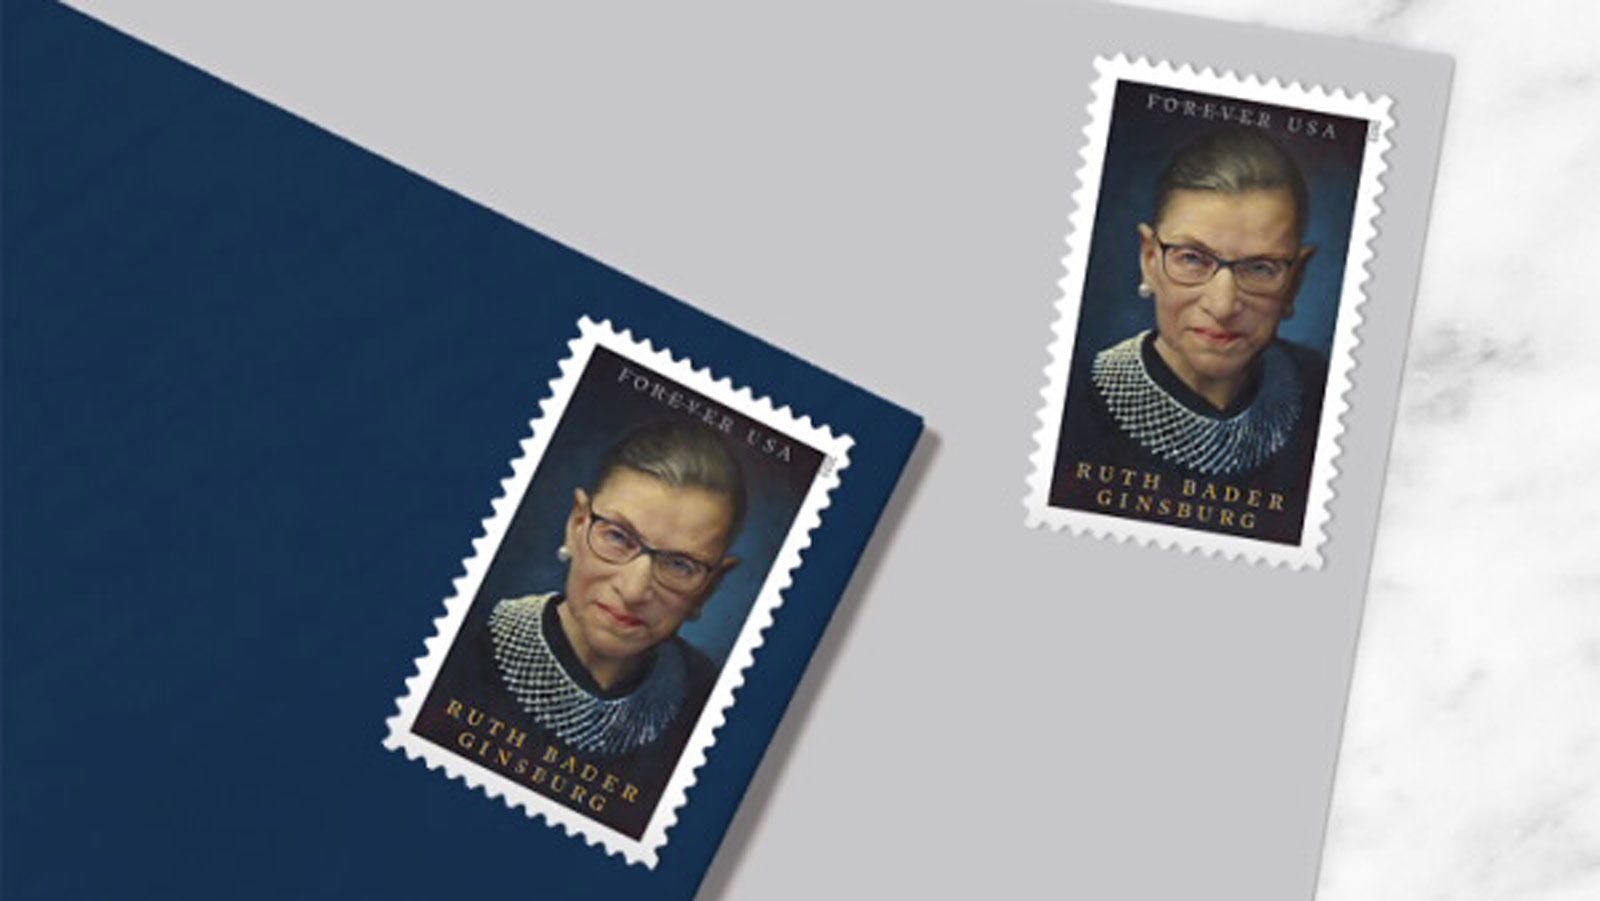 New stamp honors Ruth Bader Ginsburg as Court Justice and cultural icon